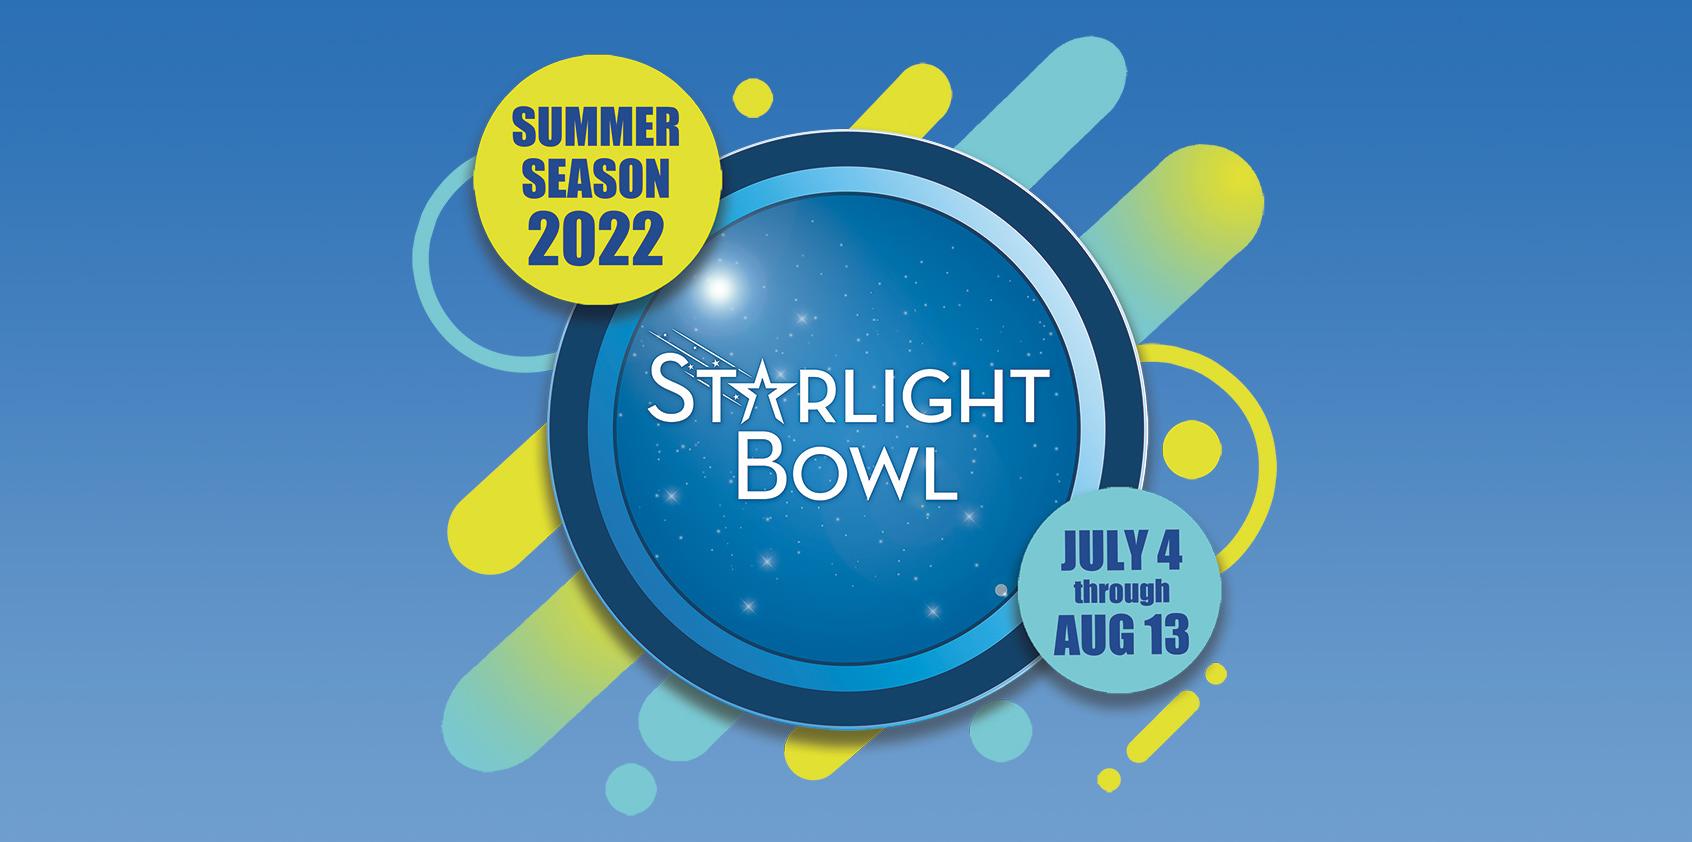 Starlight Bowl: Private Engagement - Big Bad Voodoo Daddy